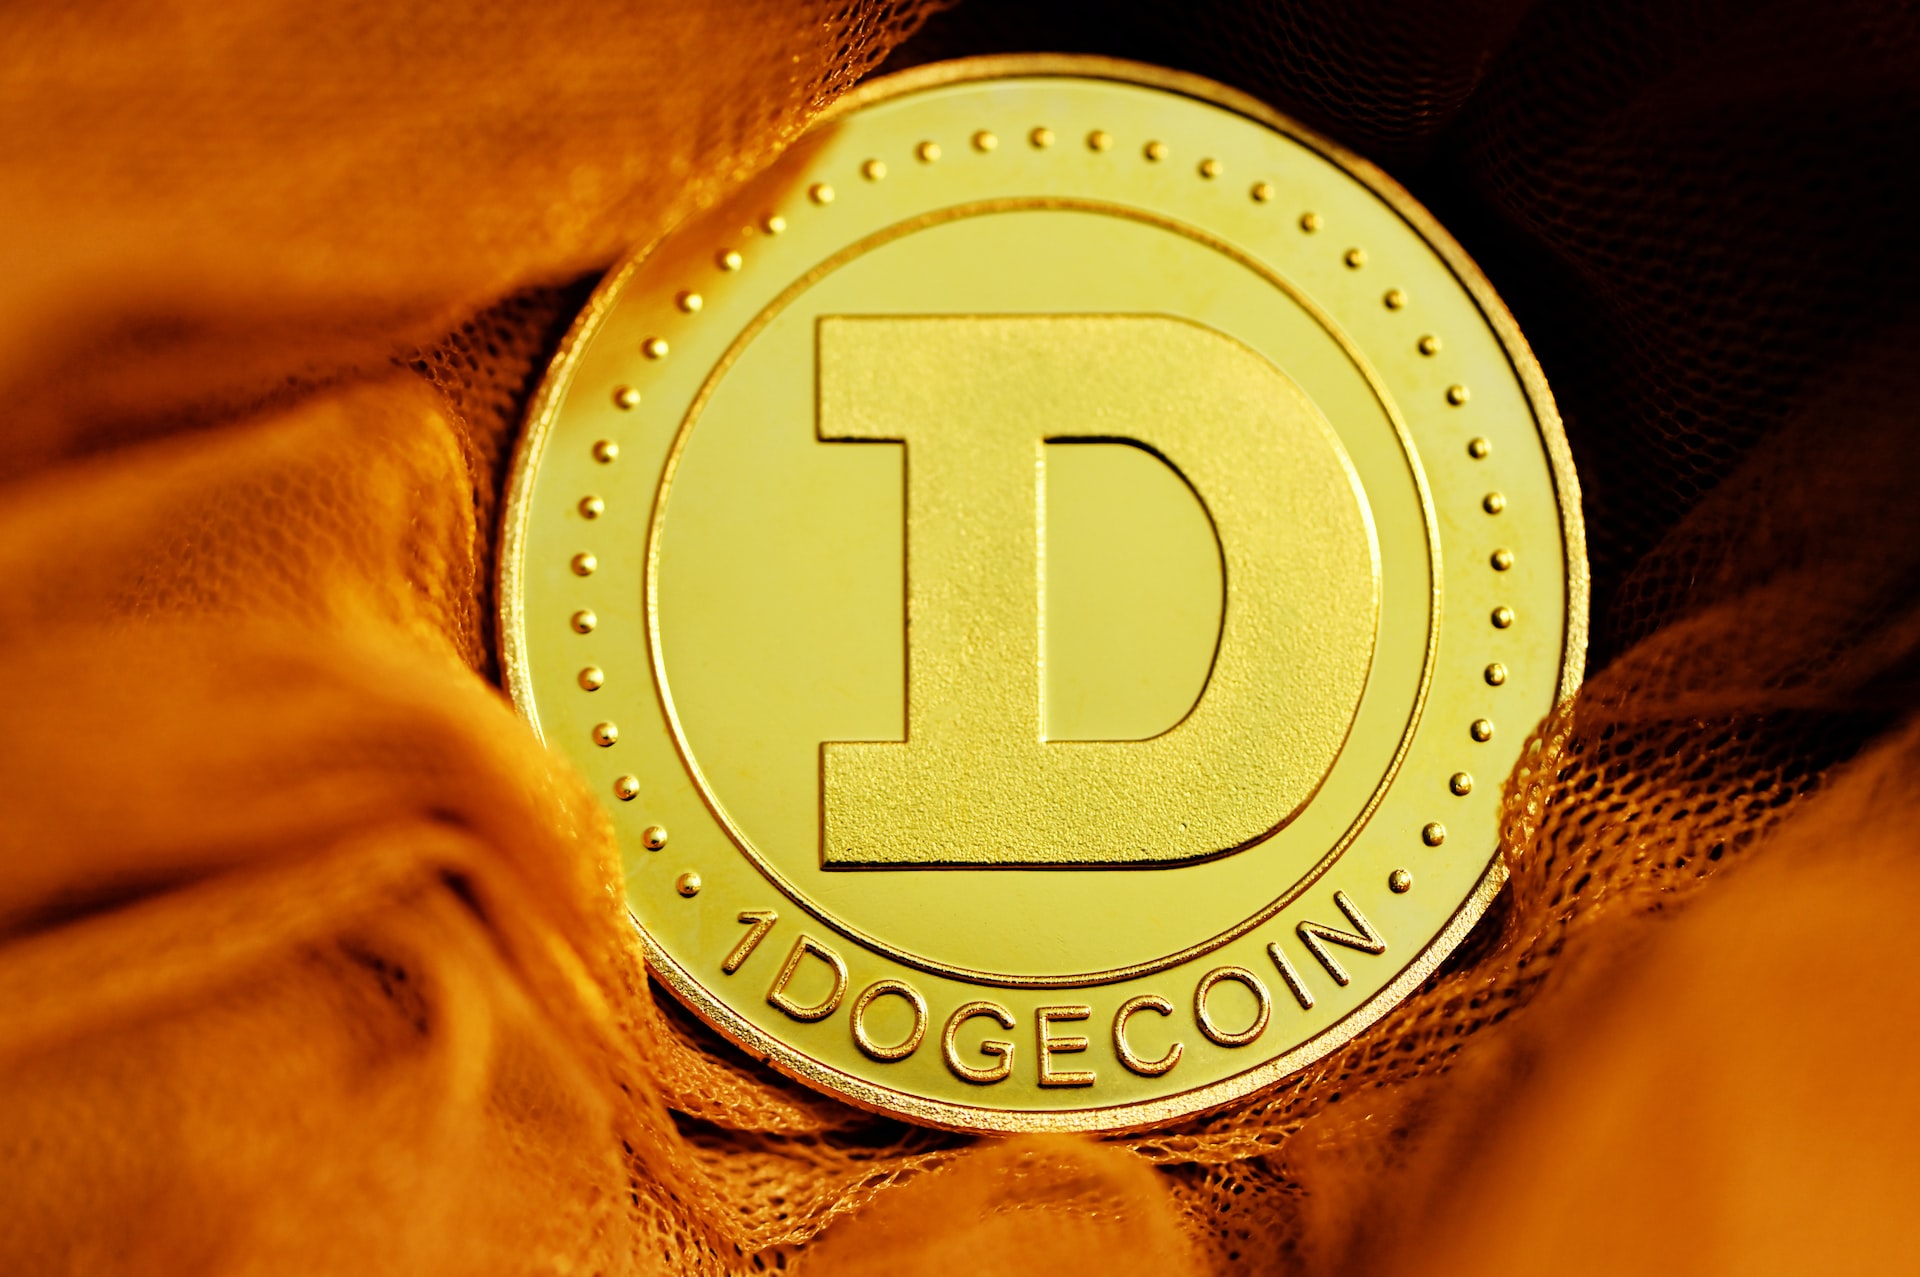 $DOGE to $0.40 Is ‘One of the Safest Trades You Can Make This Cycle’, Says Crypto Analyst